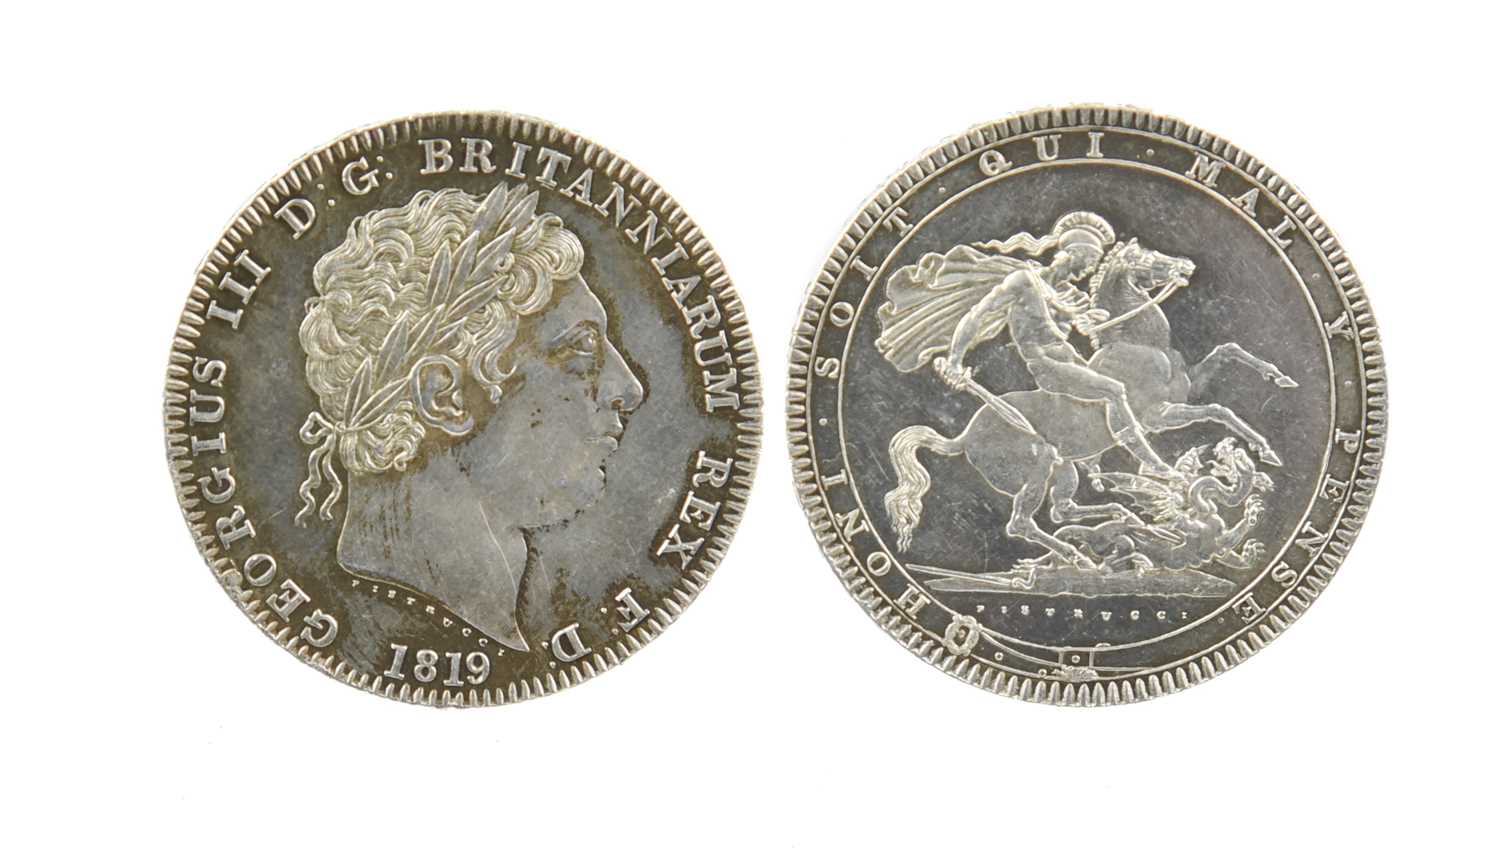 George III, silver crown, 1819, last coinage (S 3787), at least extremely fine. 38mm